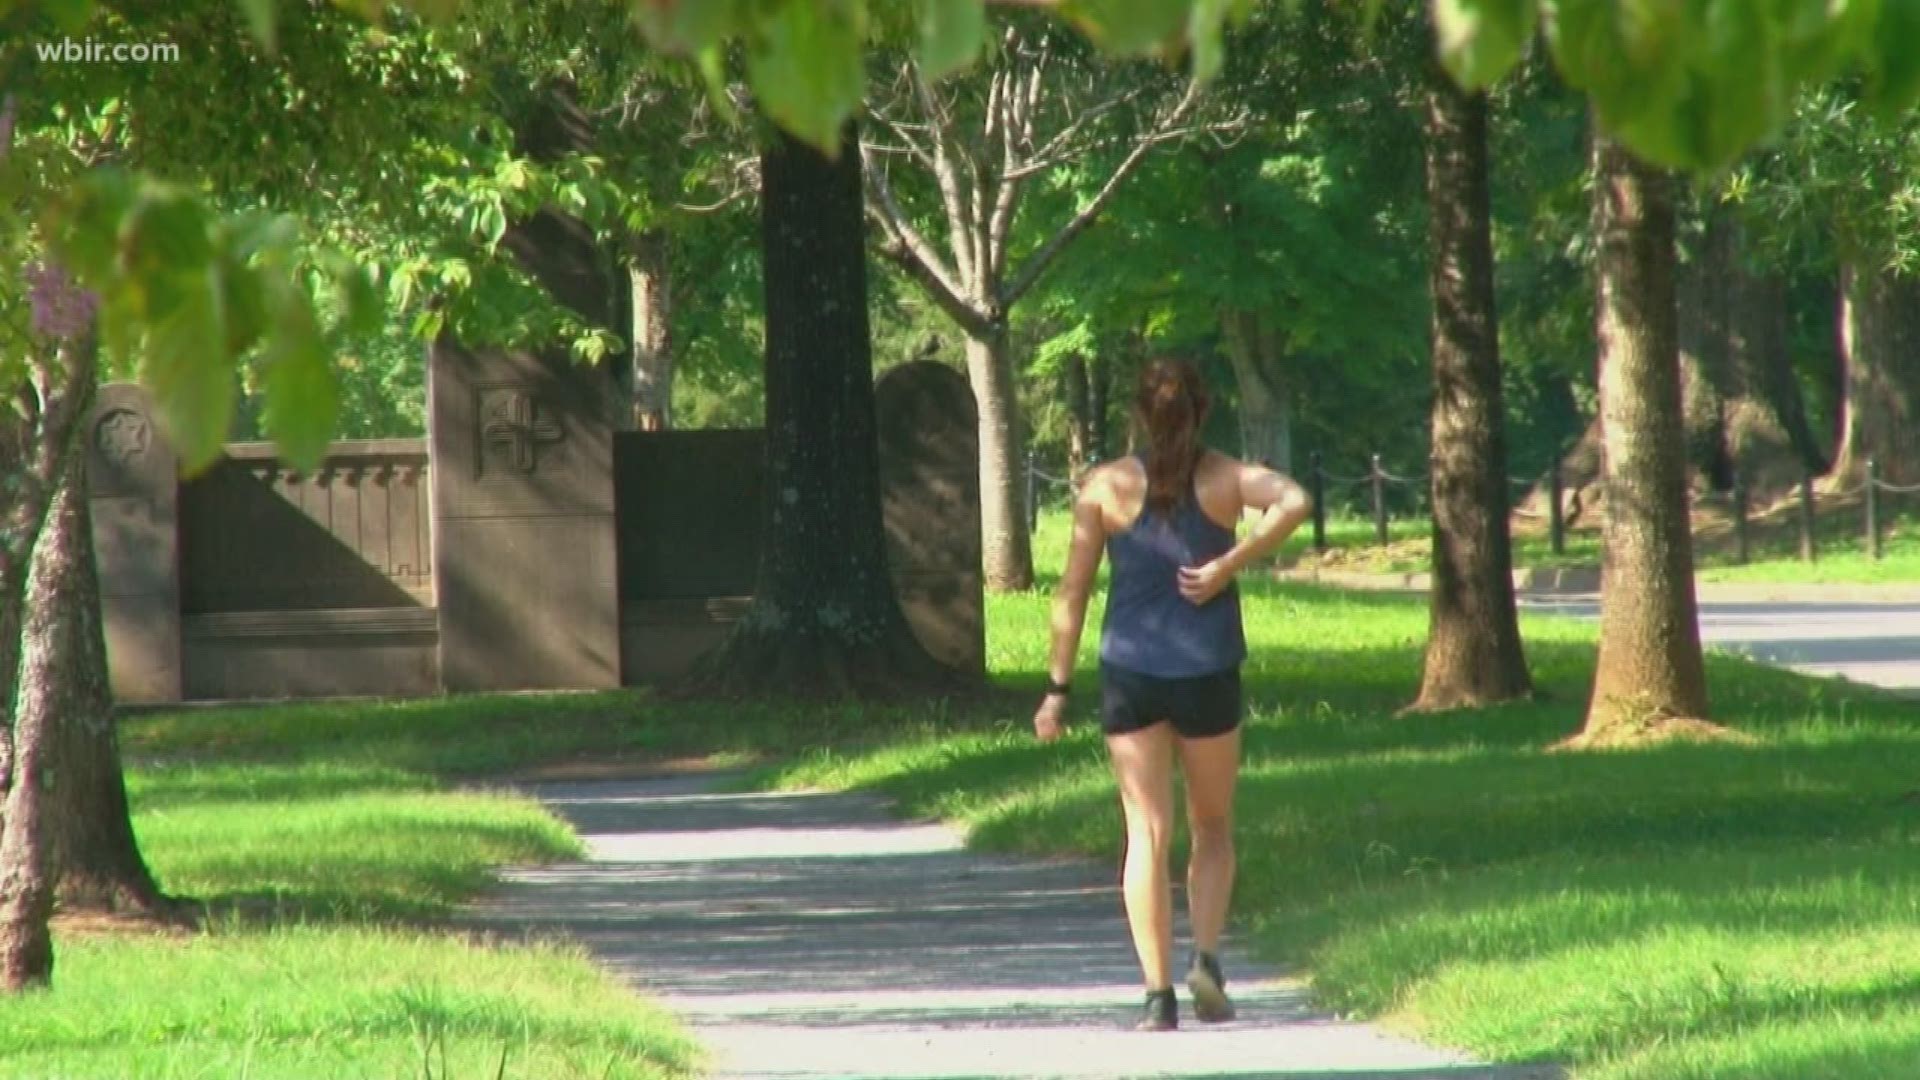 Knoxville Police are stepping up patrols on a popular greenway after a woman reported an assault on her morning run.